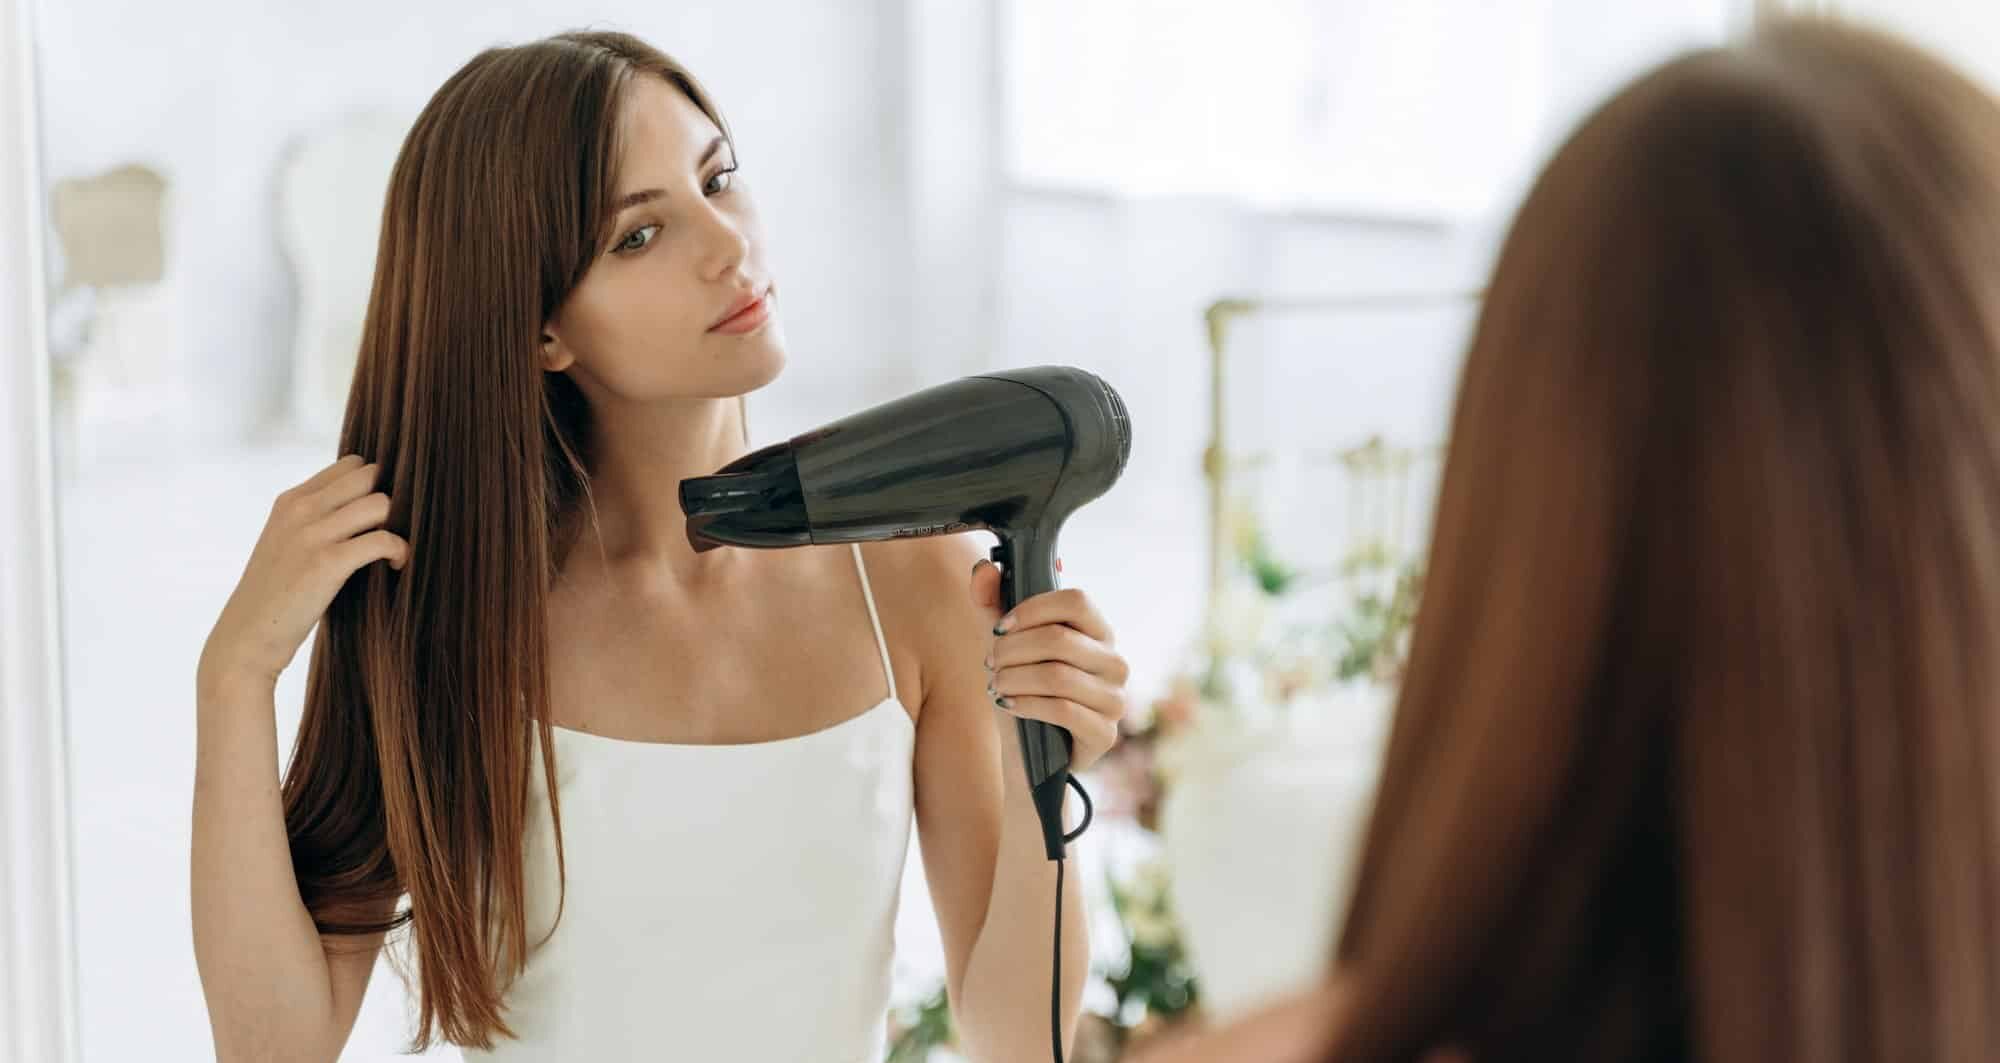 Beautiful girl using a hair dryer and smiling while looking at the mirror.